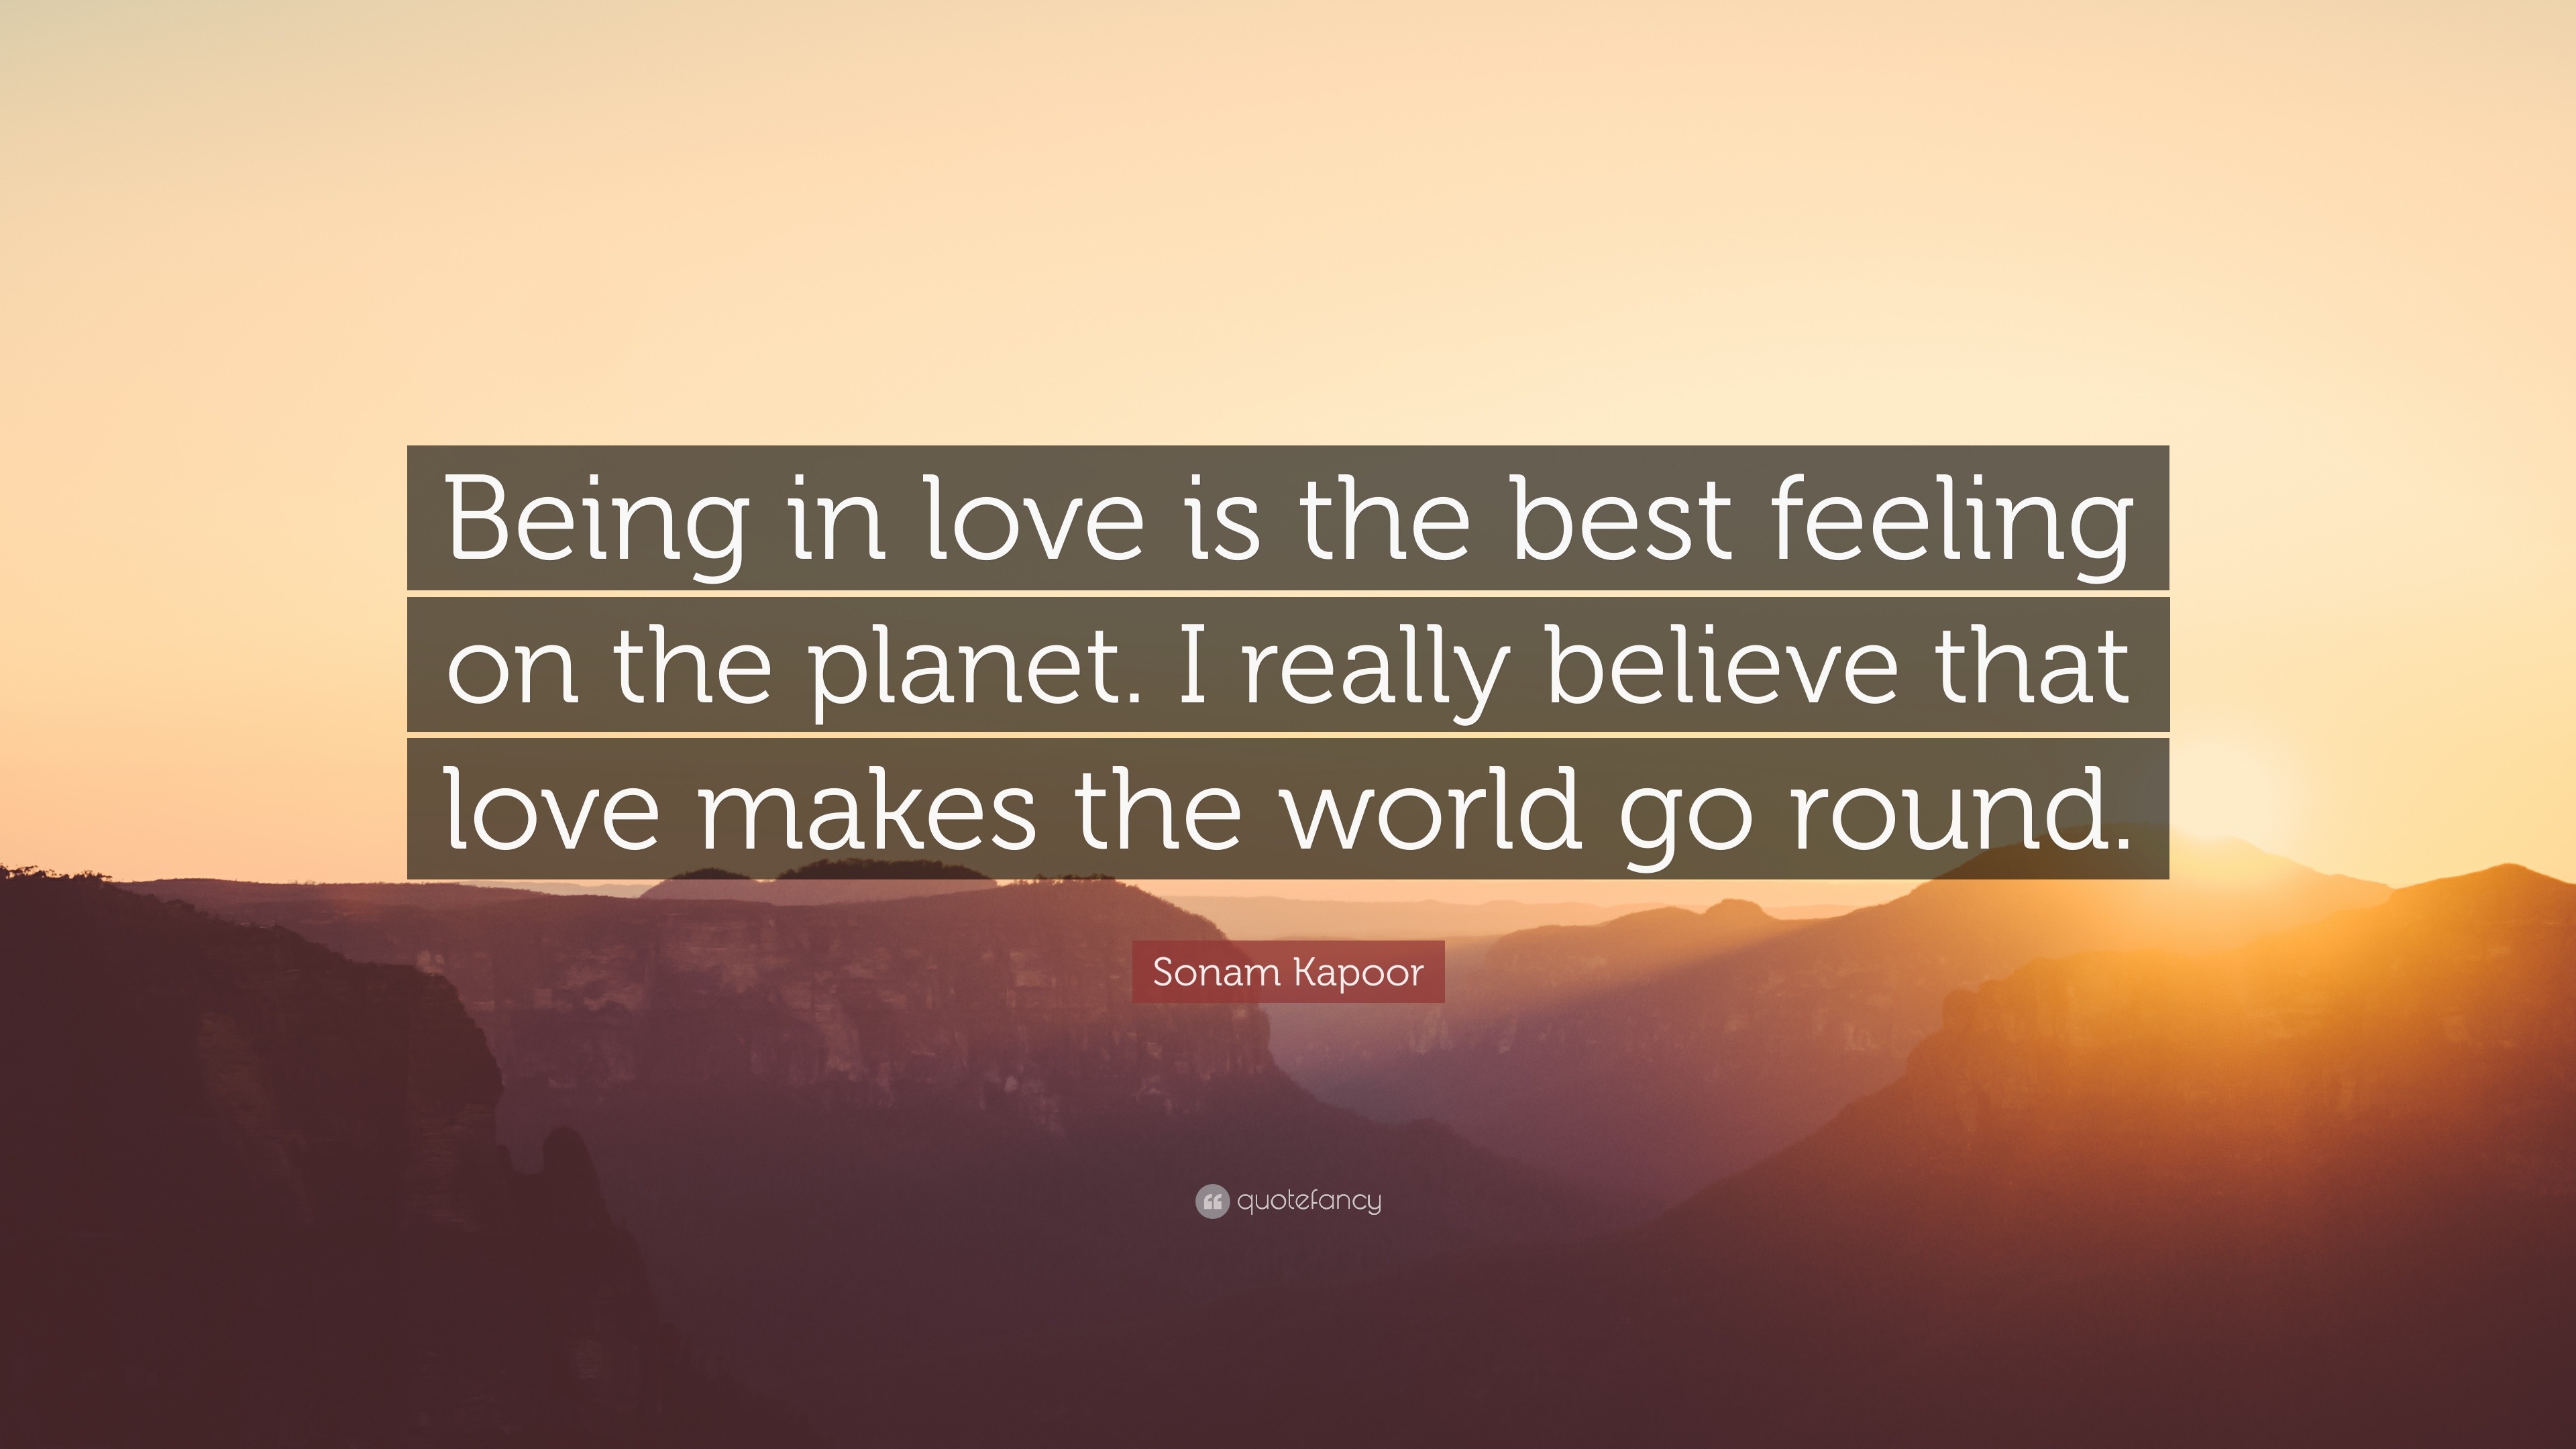 Sonam Kapoor Quote “Being in love is the best feeling on the planet